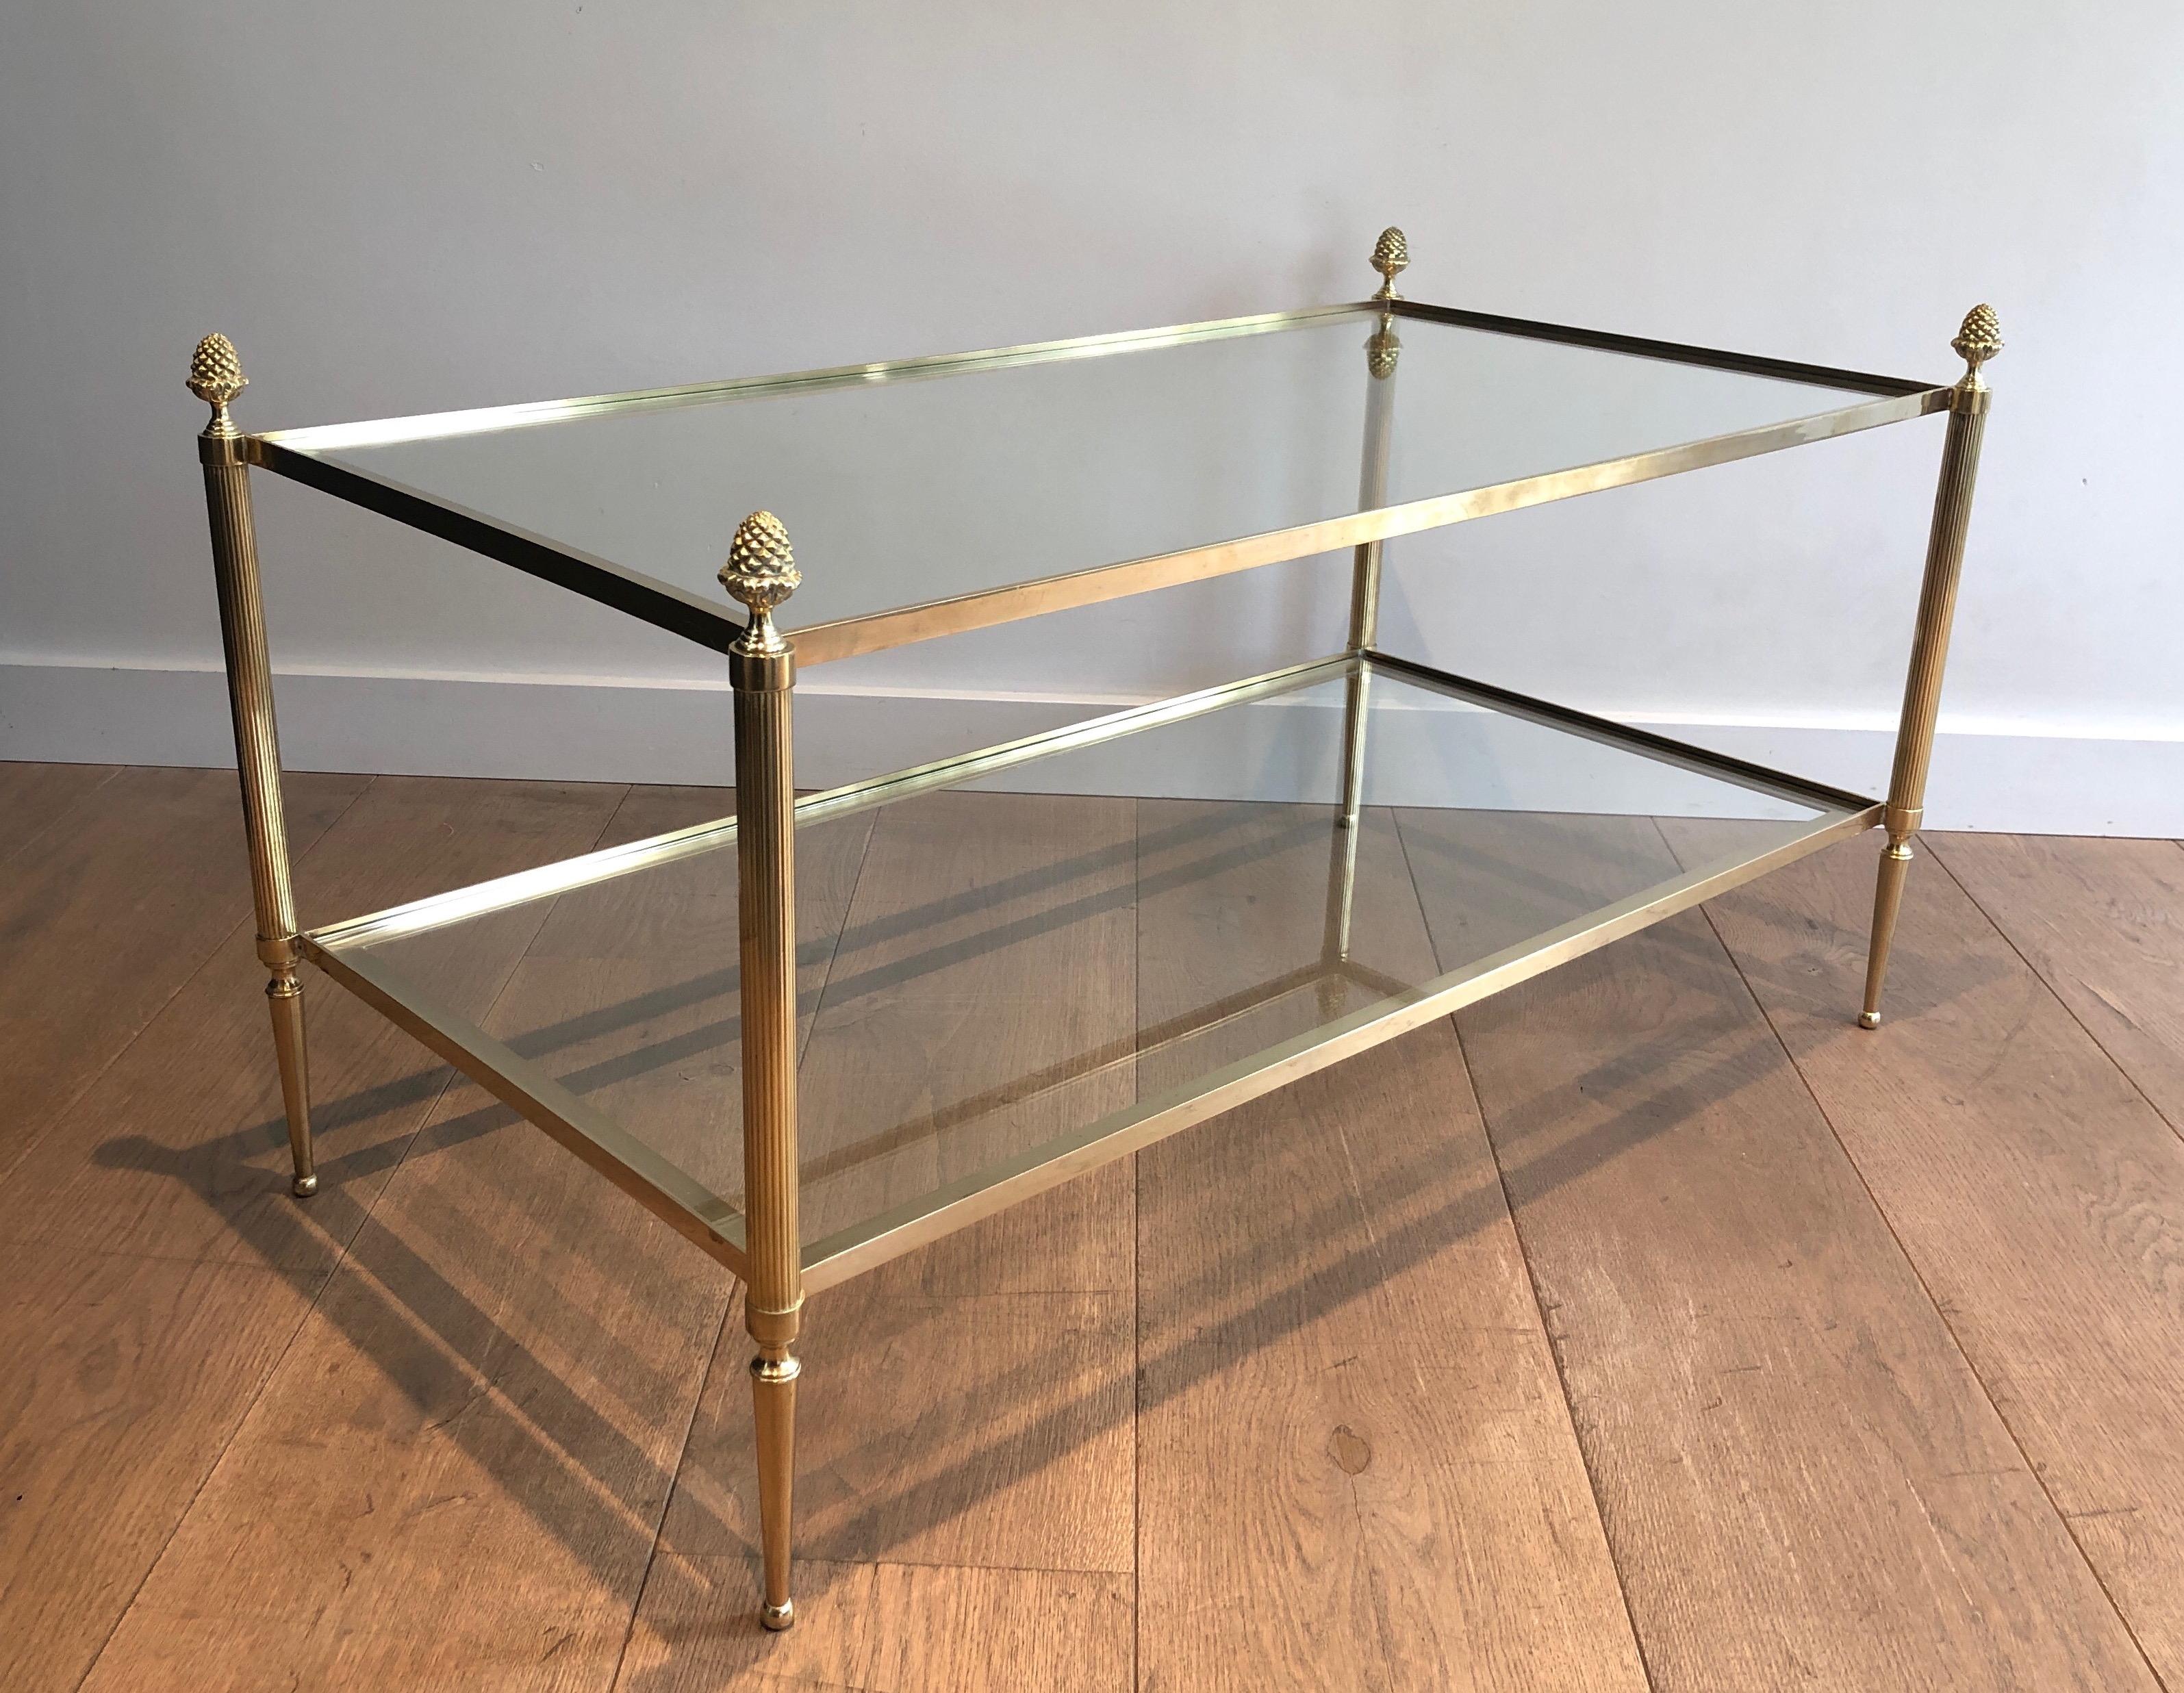 This very nice and elegant coffee table is made of brass with two glass shelves featuring bronze tassels on each corner. This is a French work by Maison Baguès. Circa 1940